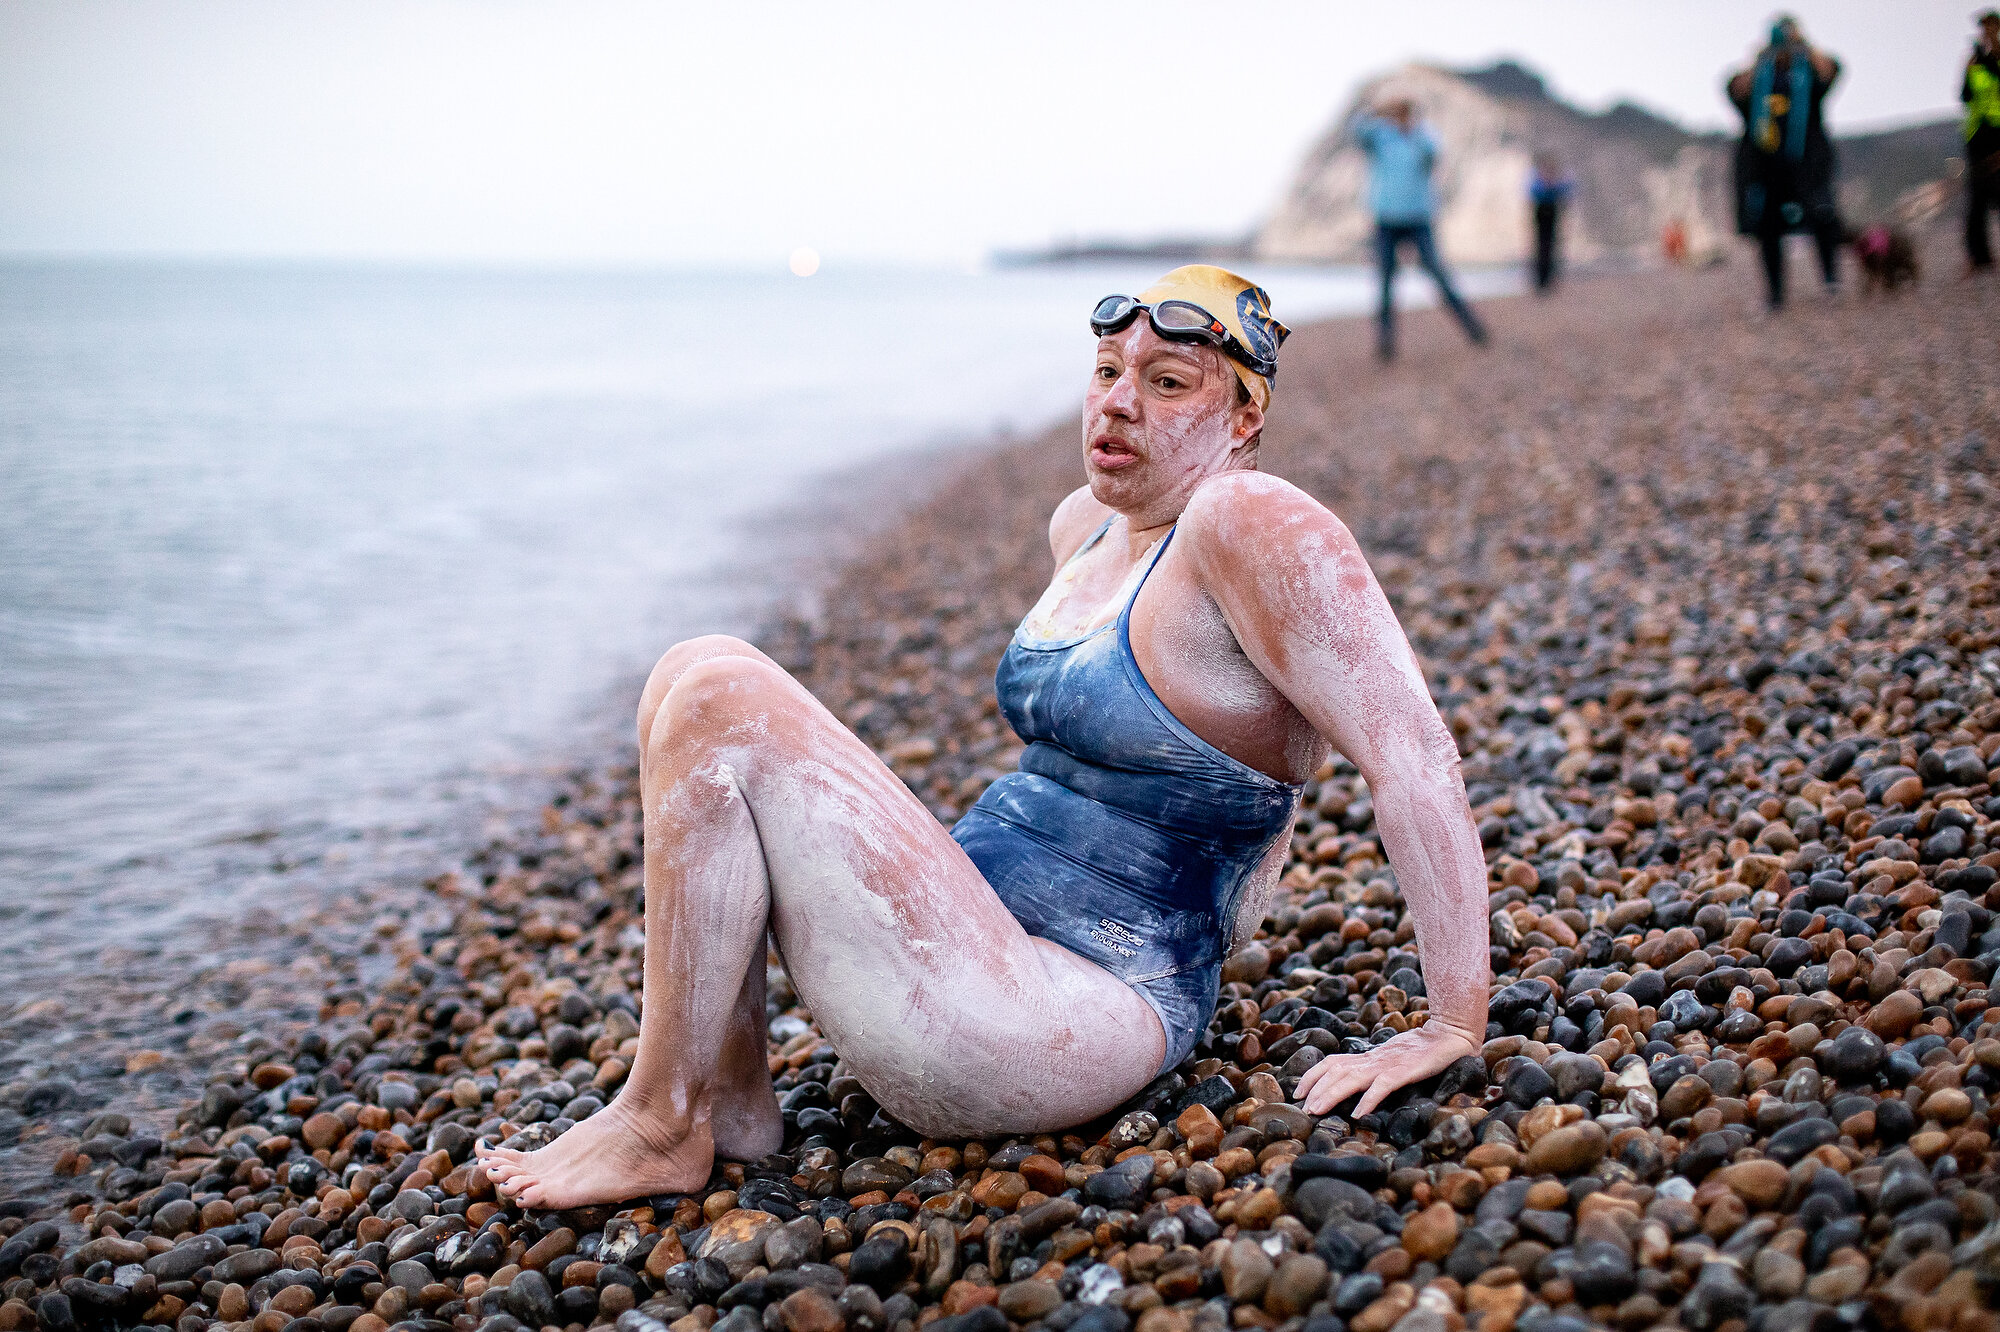  Long distance swimmer Sarah Thomas, 37, arrives at St Margaret’s Beach near Dover to become the first person to swim the English Channel four times without stopping. Photo: Tom Nicholson/The Times, 17 September 2019 